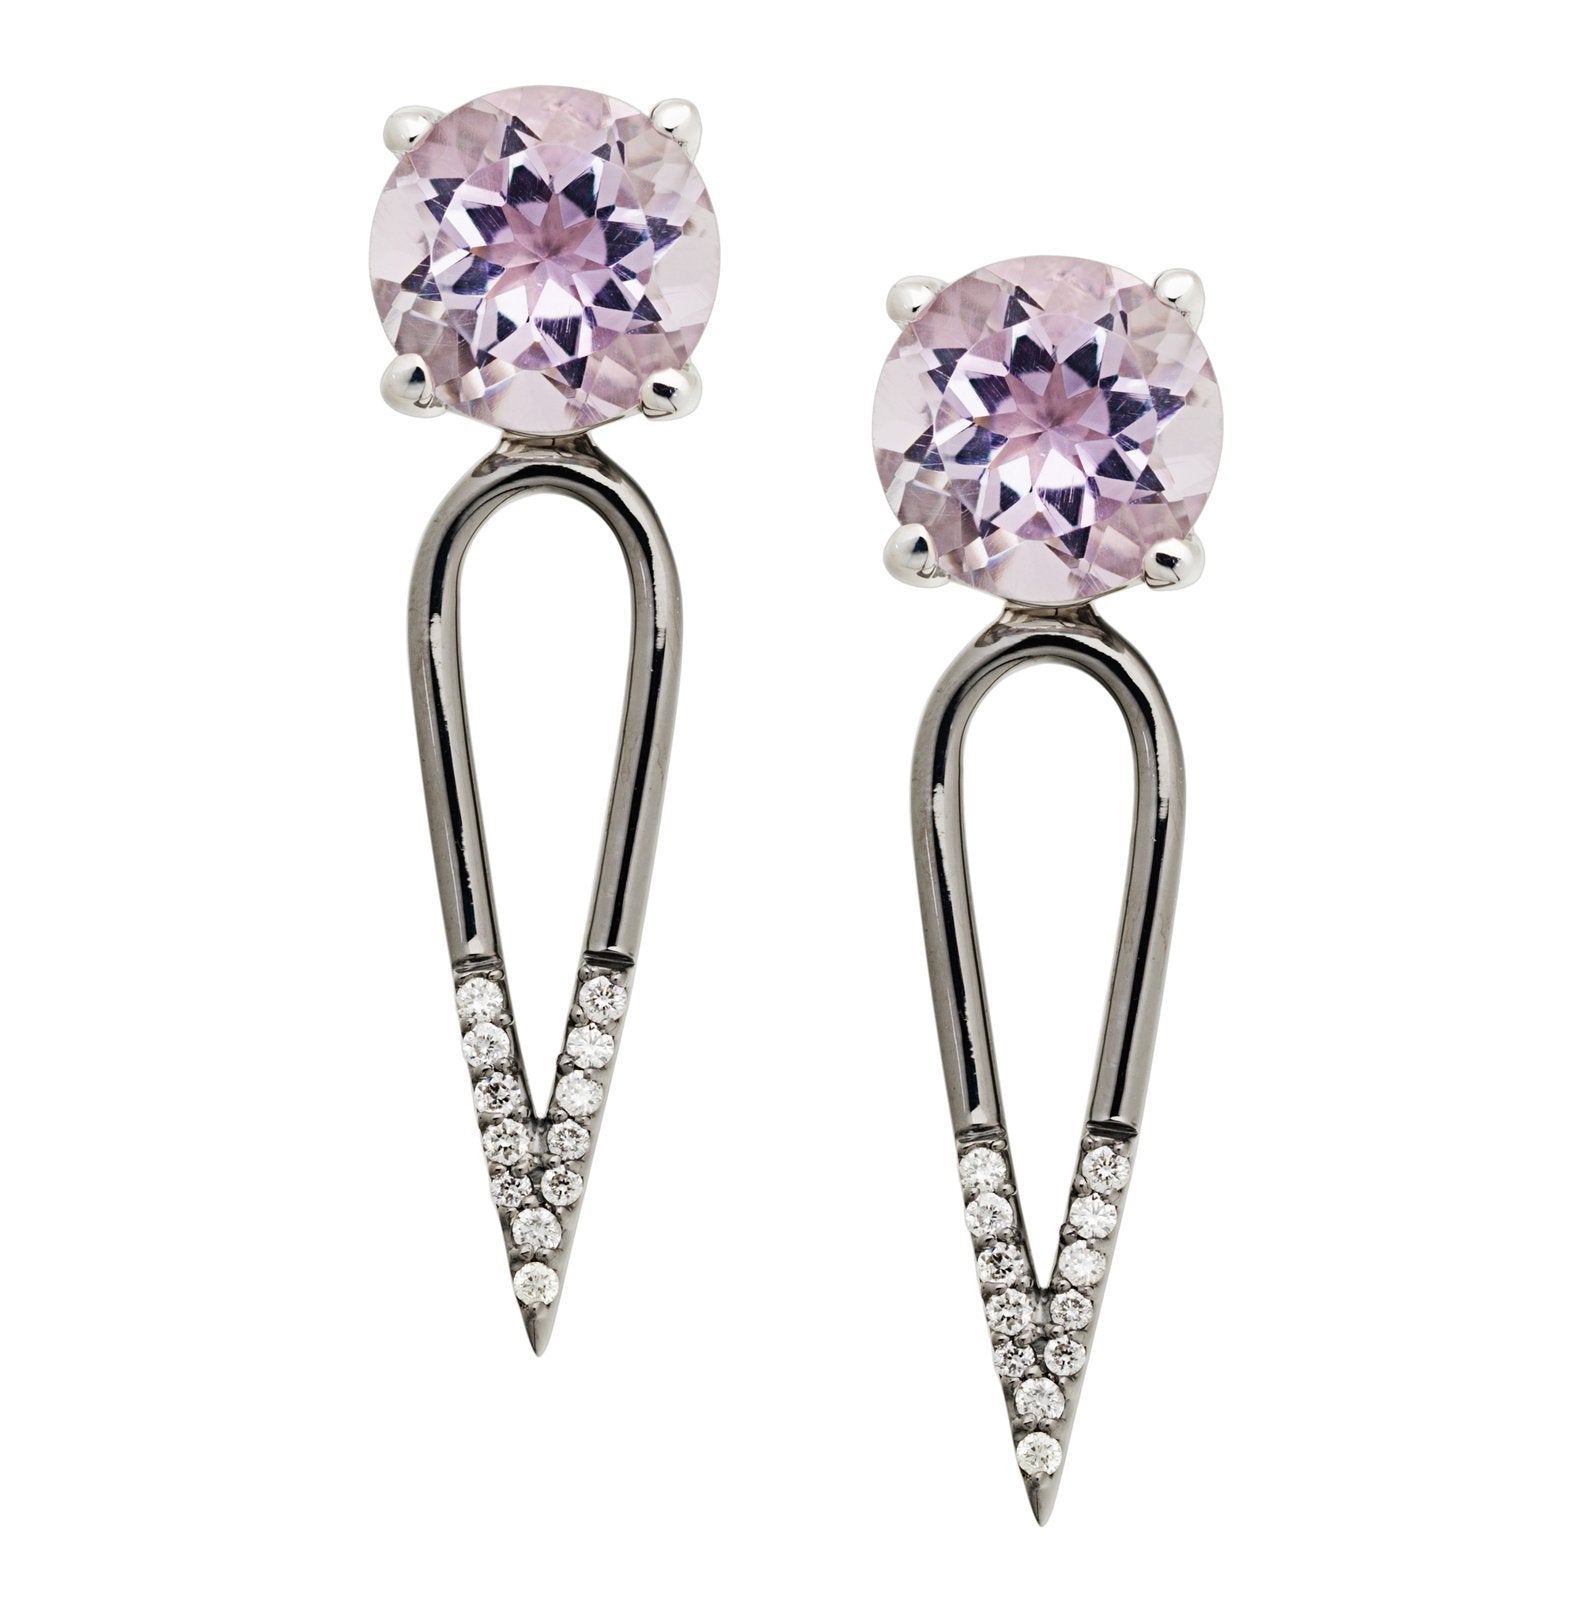 Irini Pink Amethyst gem stone diamond dipped dagger, sterling silver earrings are edgy yet elegant and the perfect gift, made in nyc